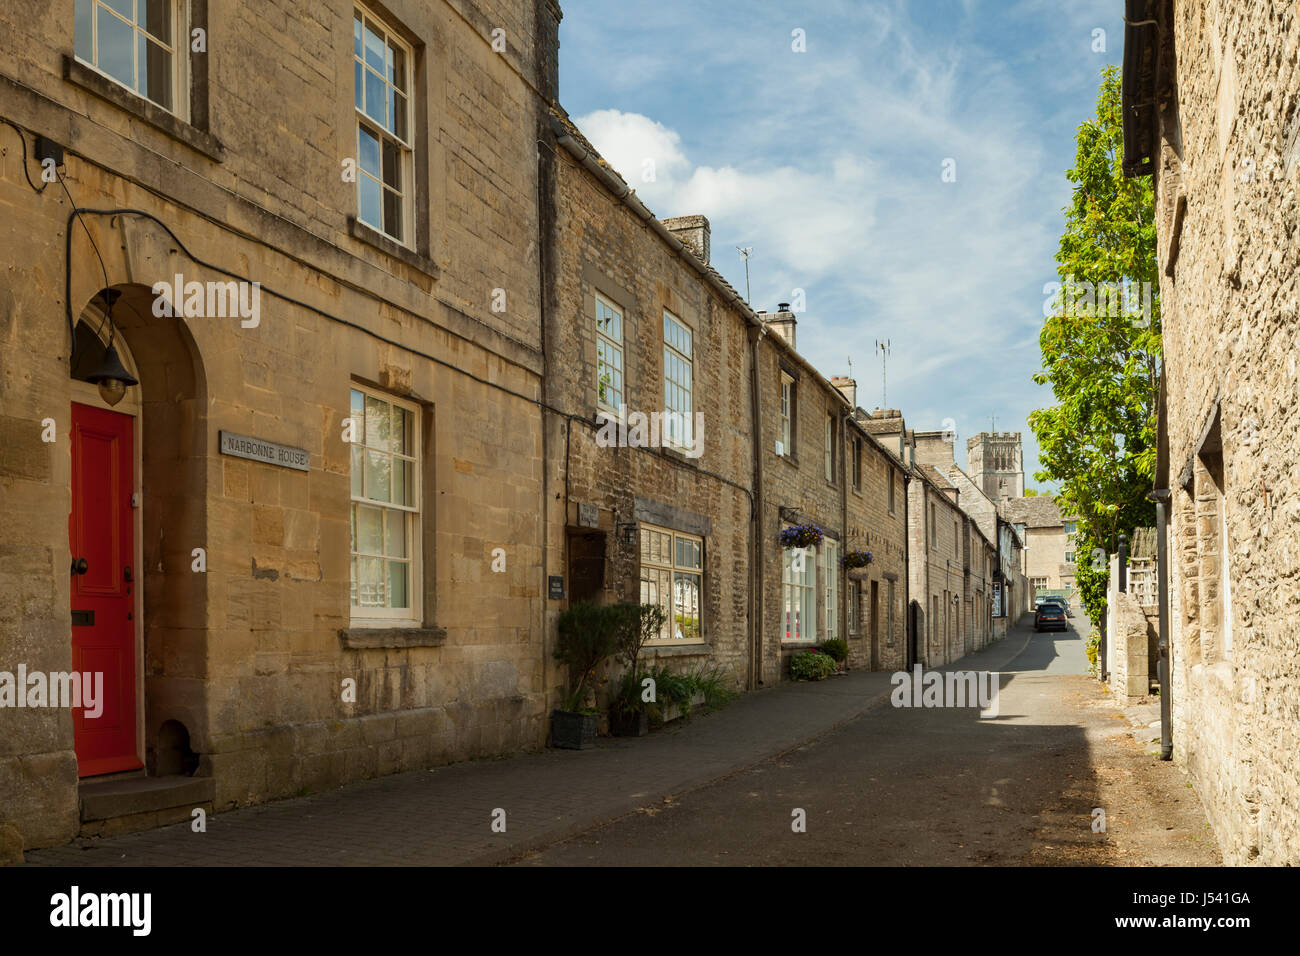 Spring afternoon in the small Cotswold town of Northleach, Gloucestershire, England. Stock Photo